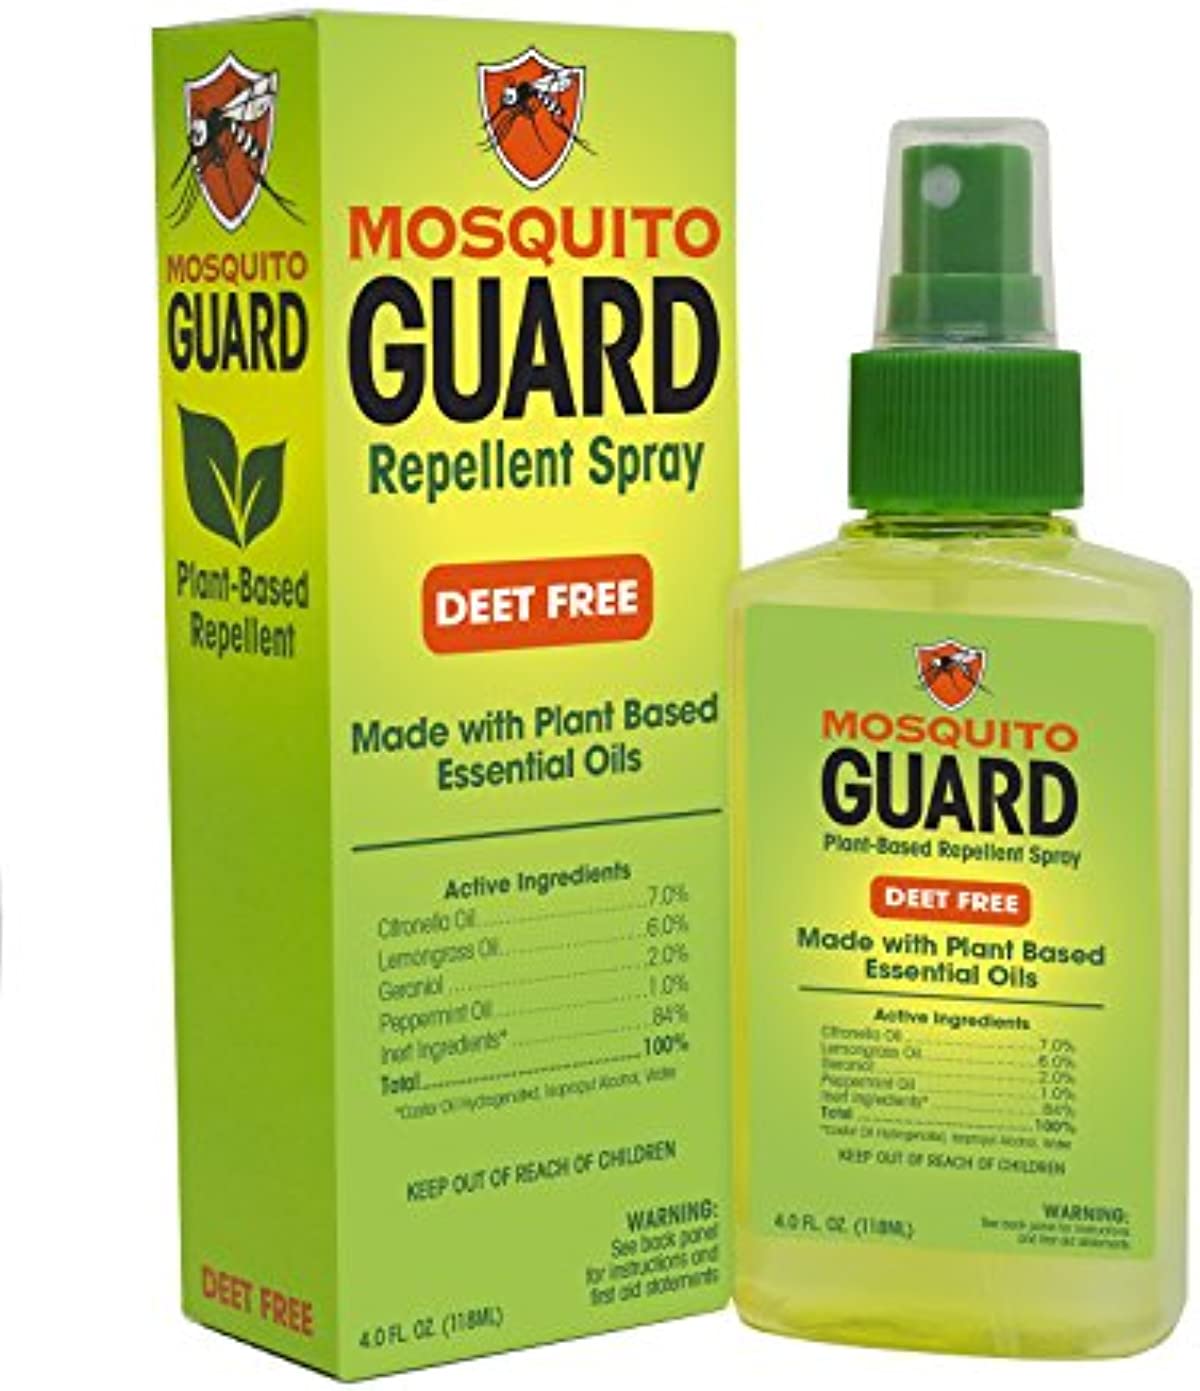 Mosquito Guard Mosquito Repellent Spray - 4oz Travel Bug Spray for People, Natural Mosquito Spray - Mosquito Repellent for Patio and Outdoor